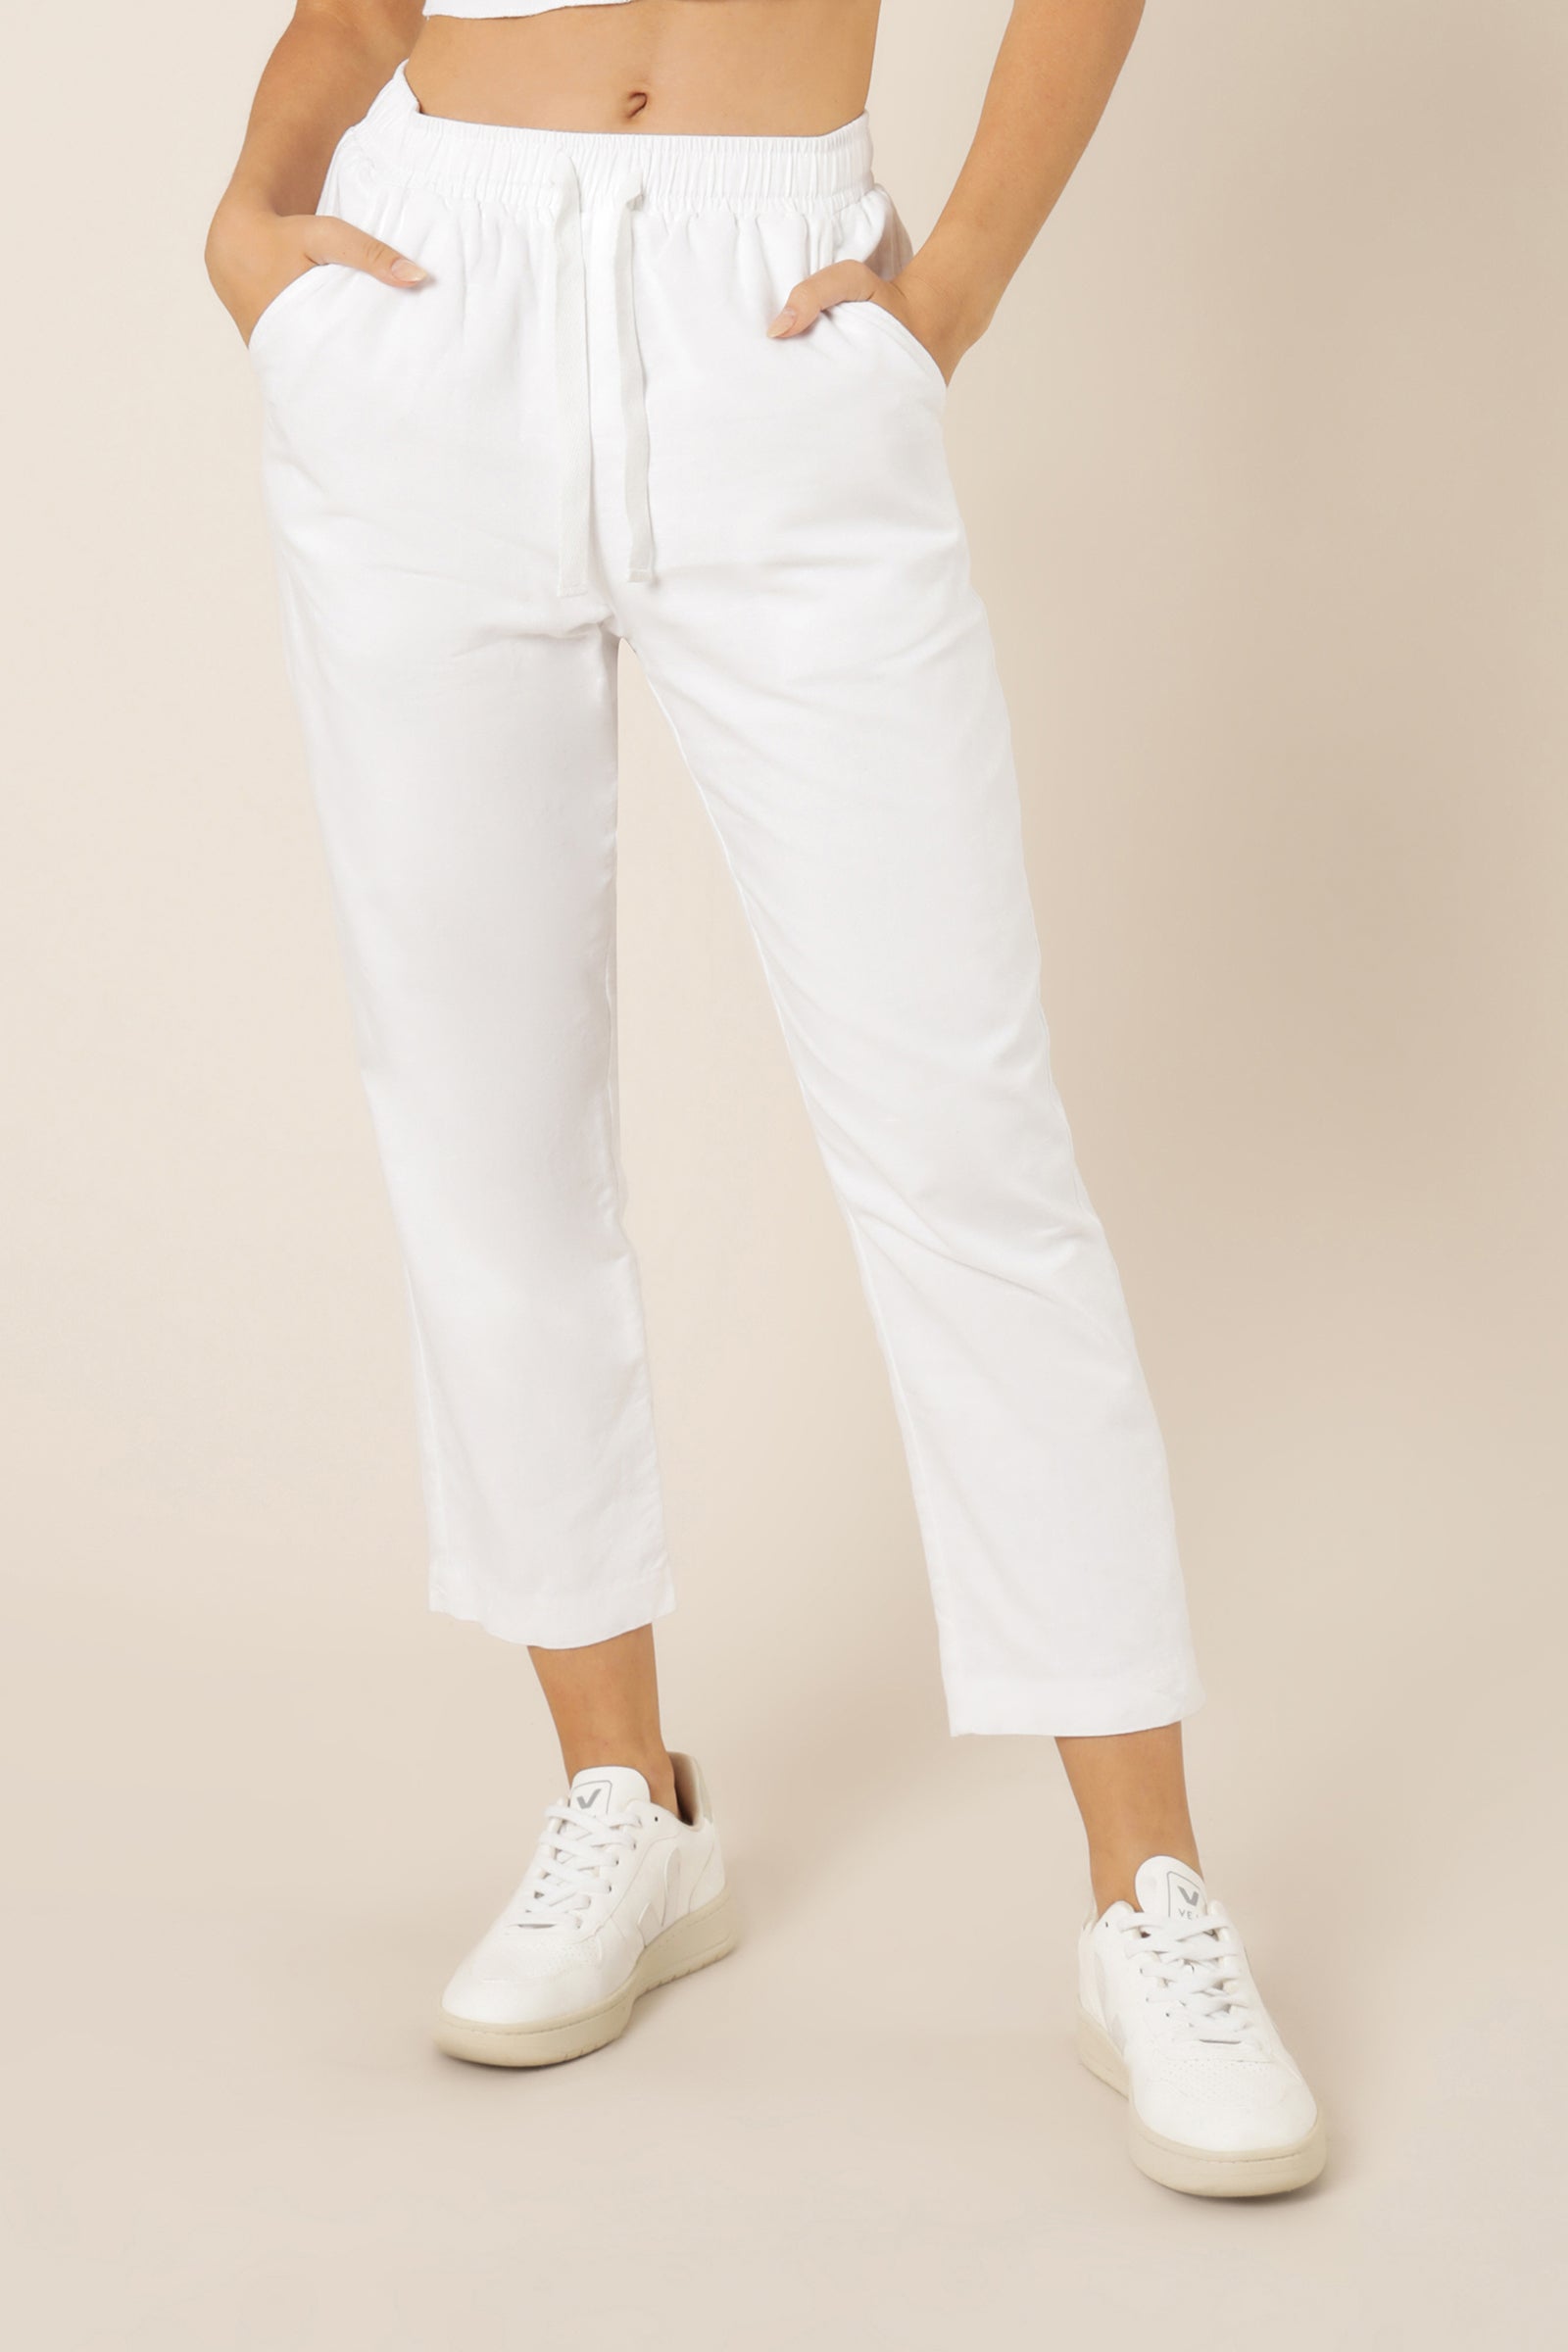 Nude Lucy nude classic pant white pants